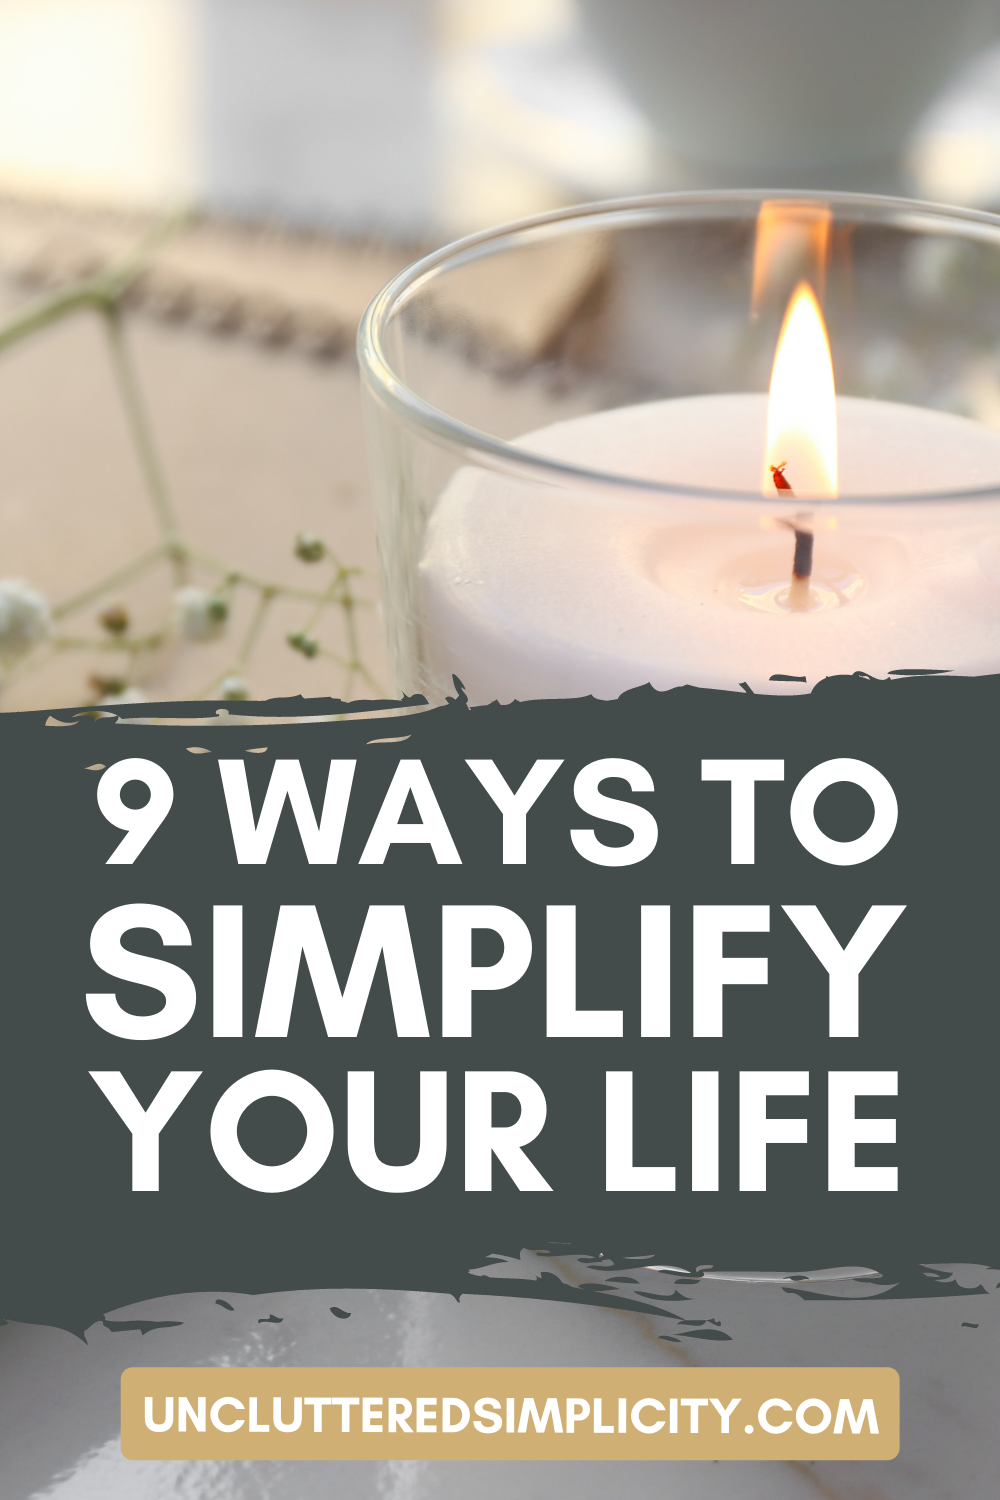 9 ways to simplify your life - stop making your life harder than it needs to be